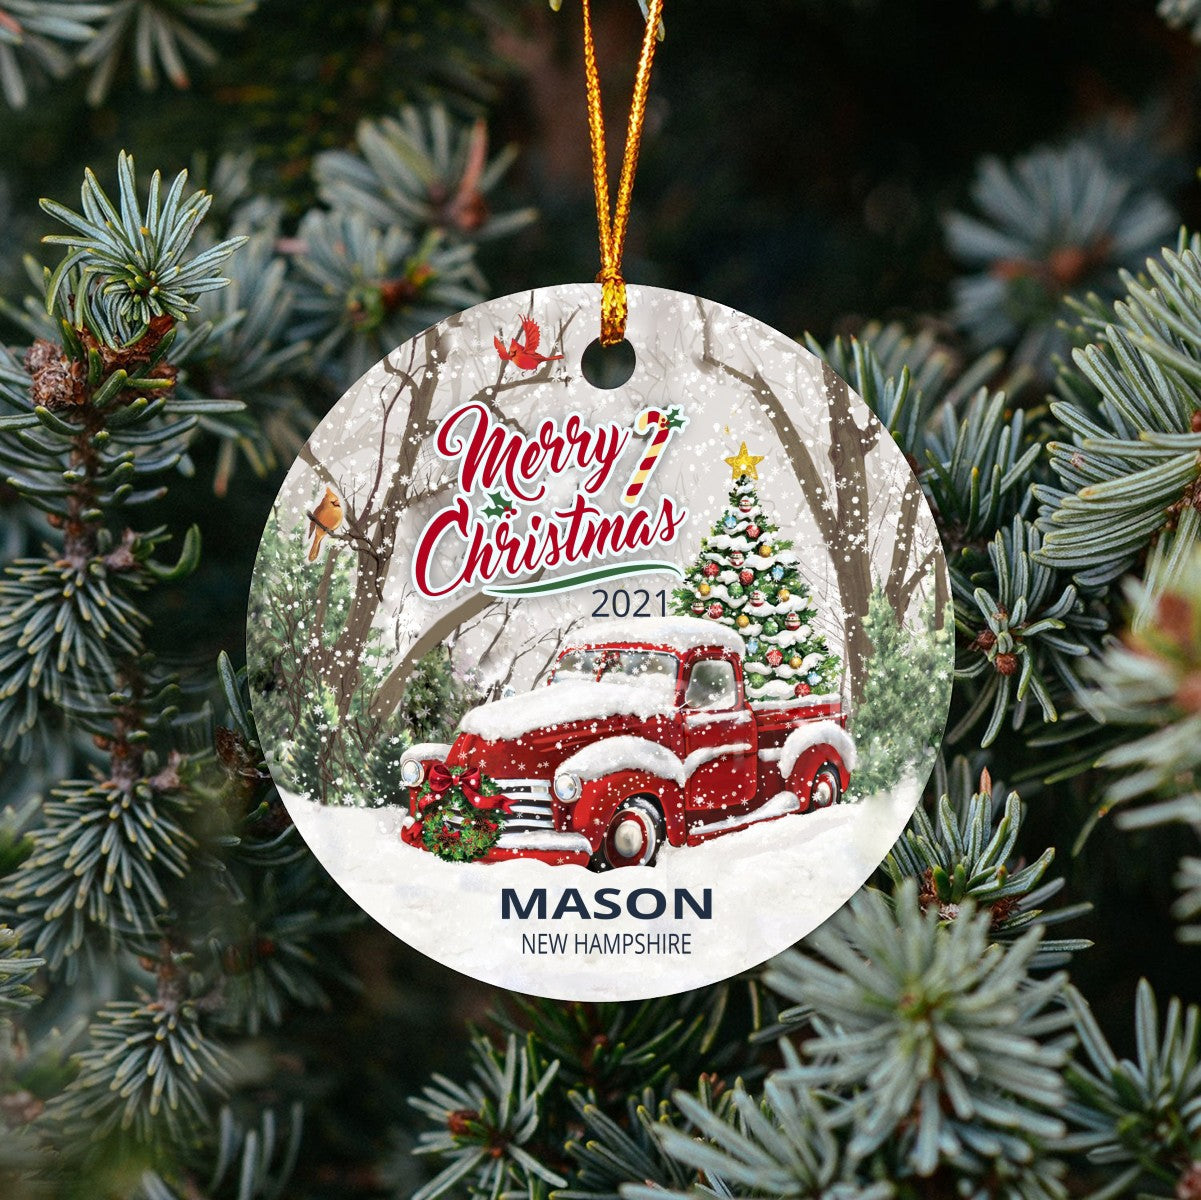 Christmas Tree Ornaments Mason - Ornament With Name City, State Mason New Hampshire NH Ornament - Red Truck Xmas Ornaments 3'' Plastic Gift For Family, Friend And Housewarming